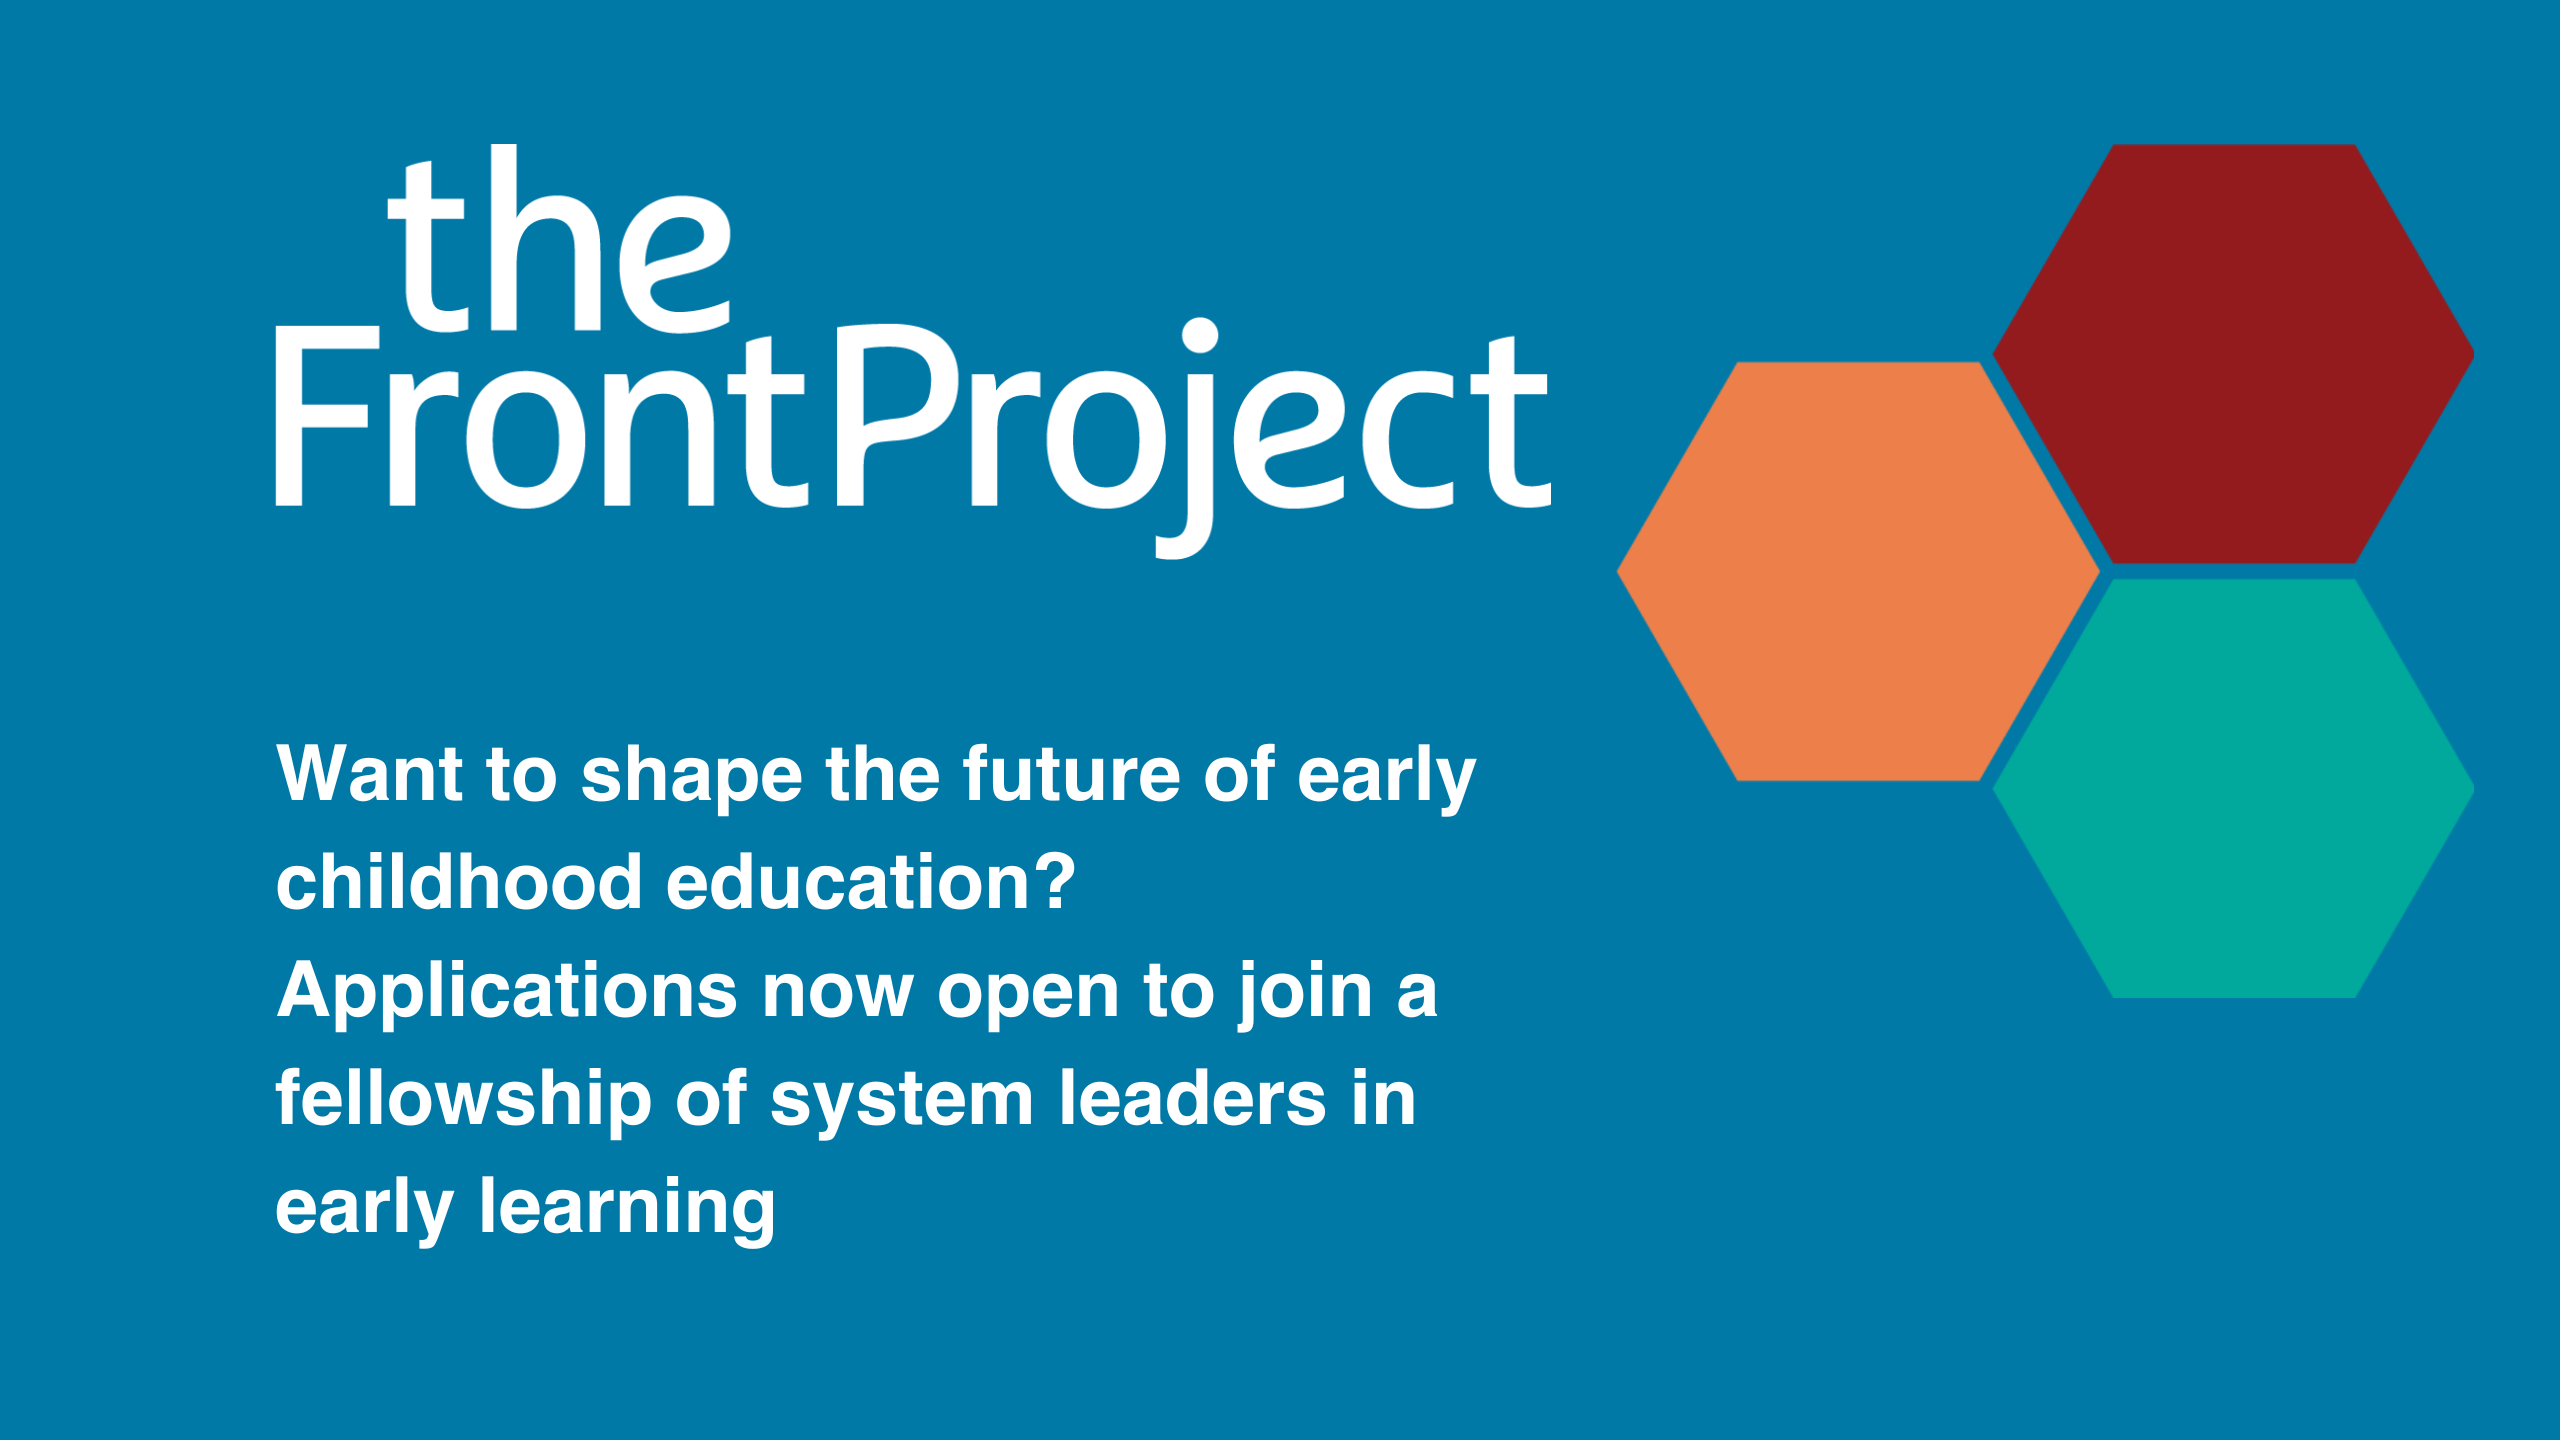 Want to shape the future of early childhood education? Applications now open to join a fellowship of system leaders in early learning 